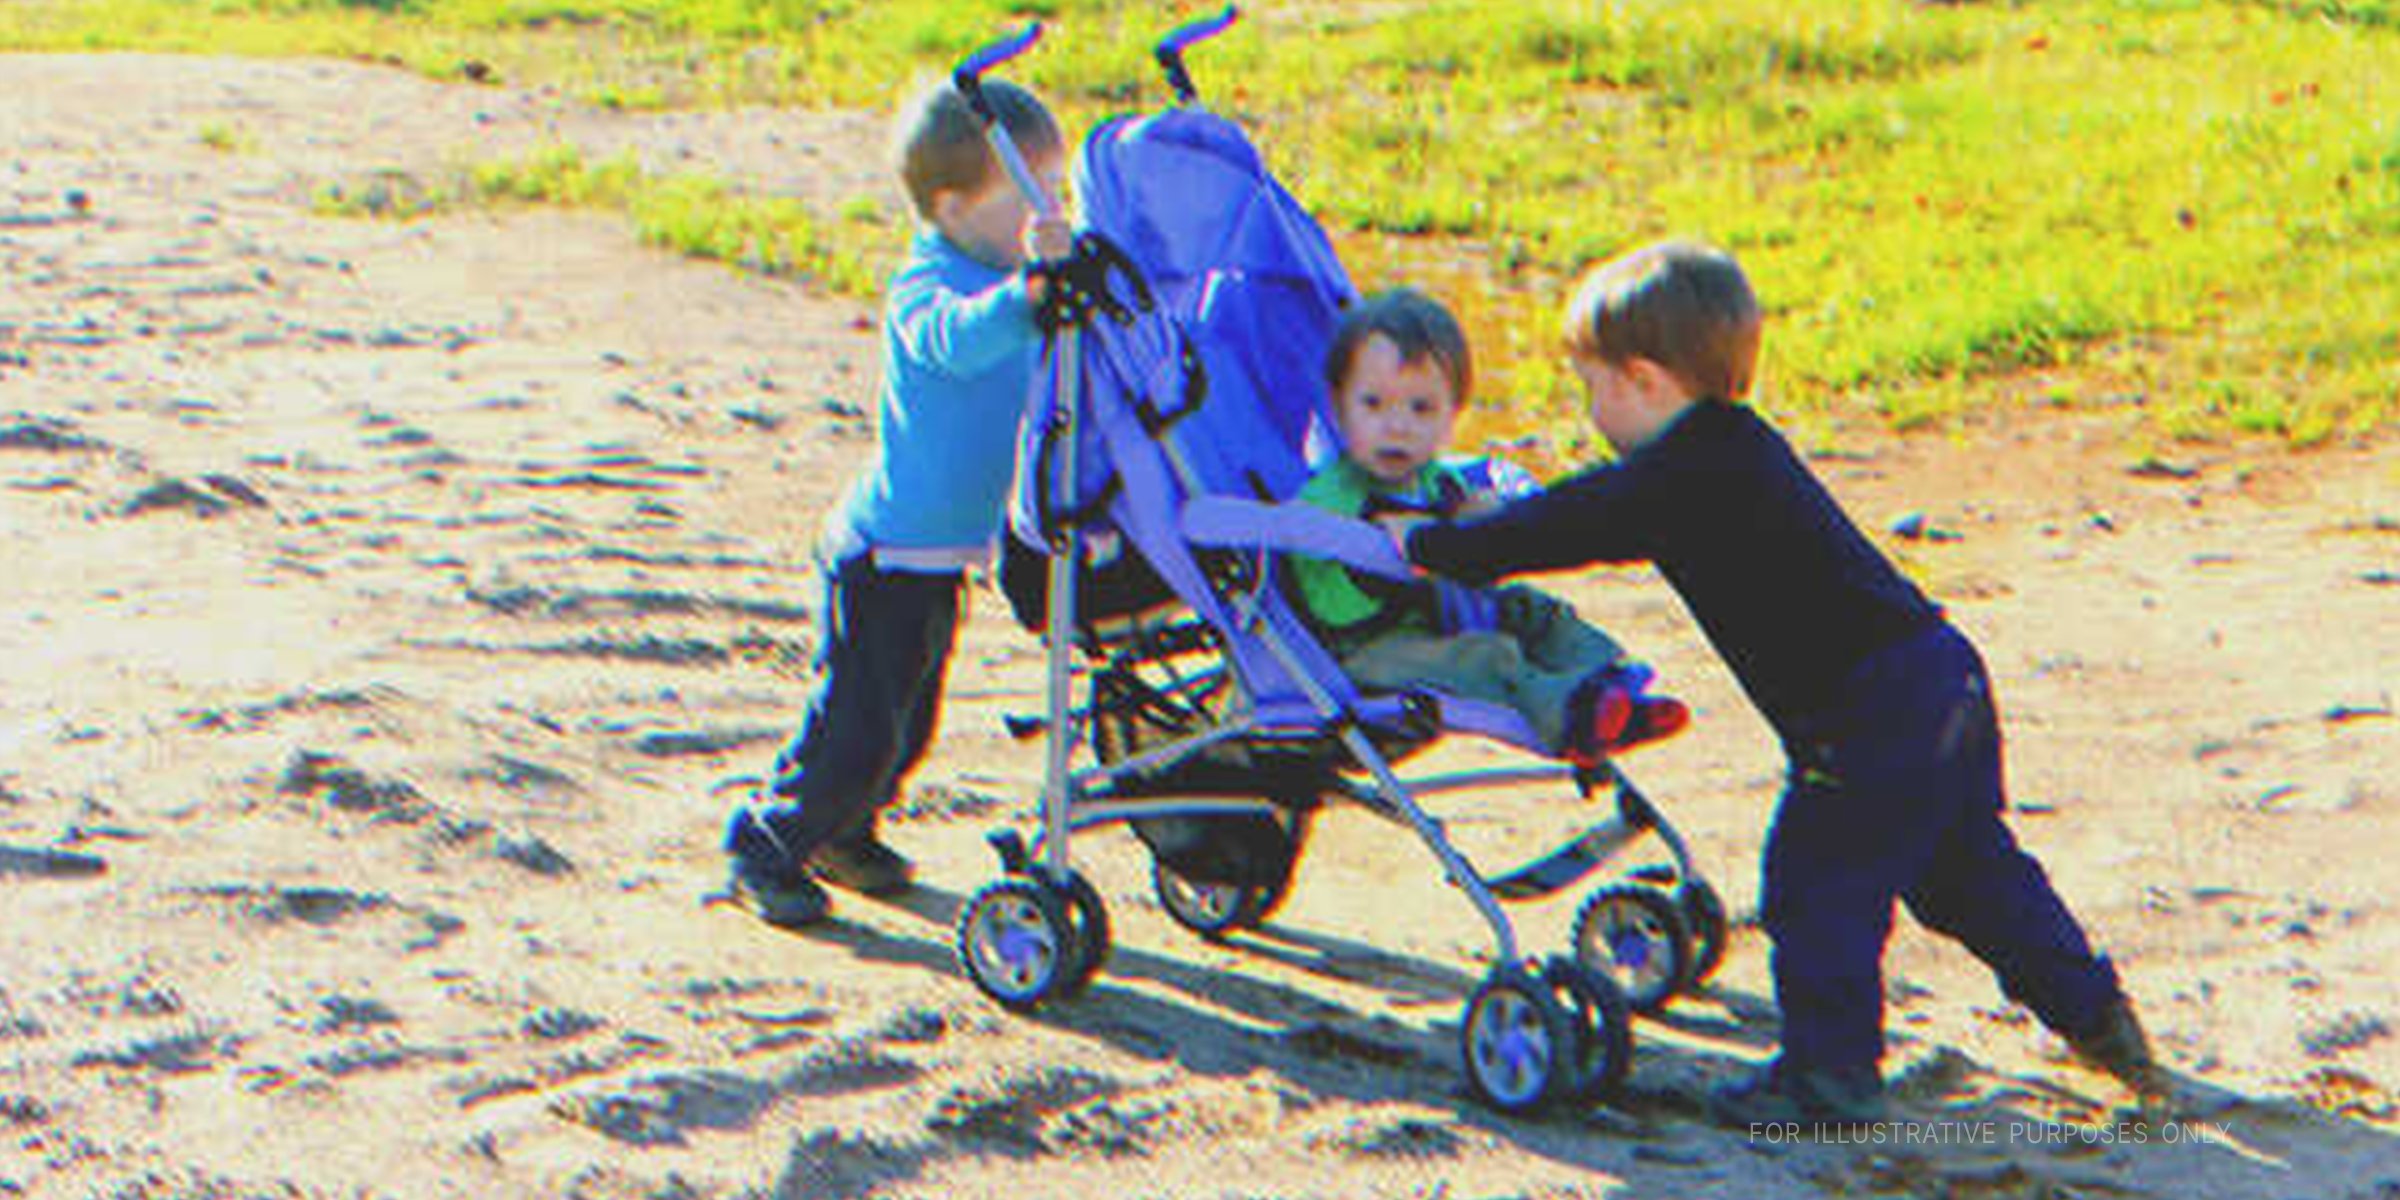 Two kids carrying a baby in a stroller | Source: Shutterstock